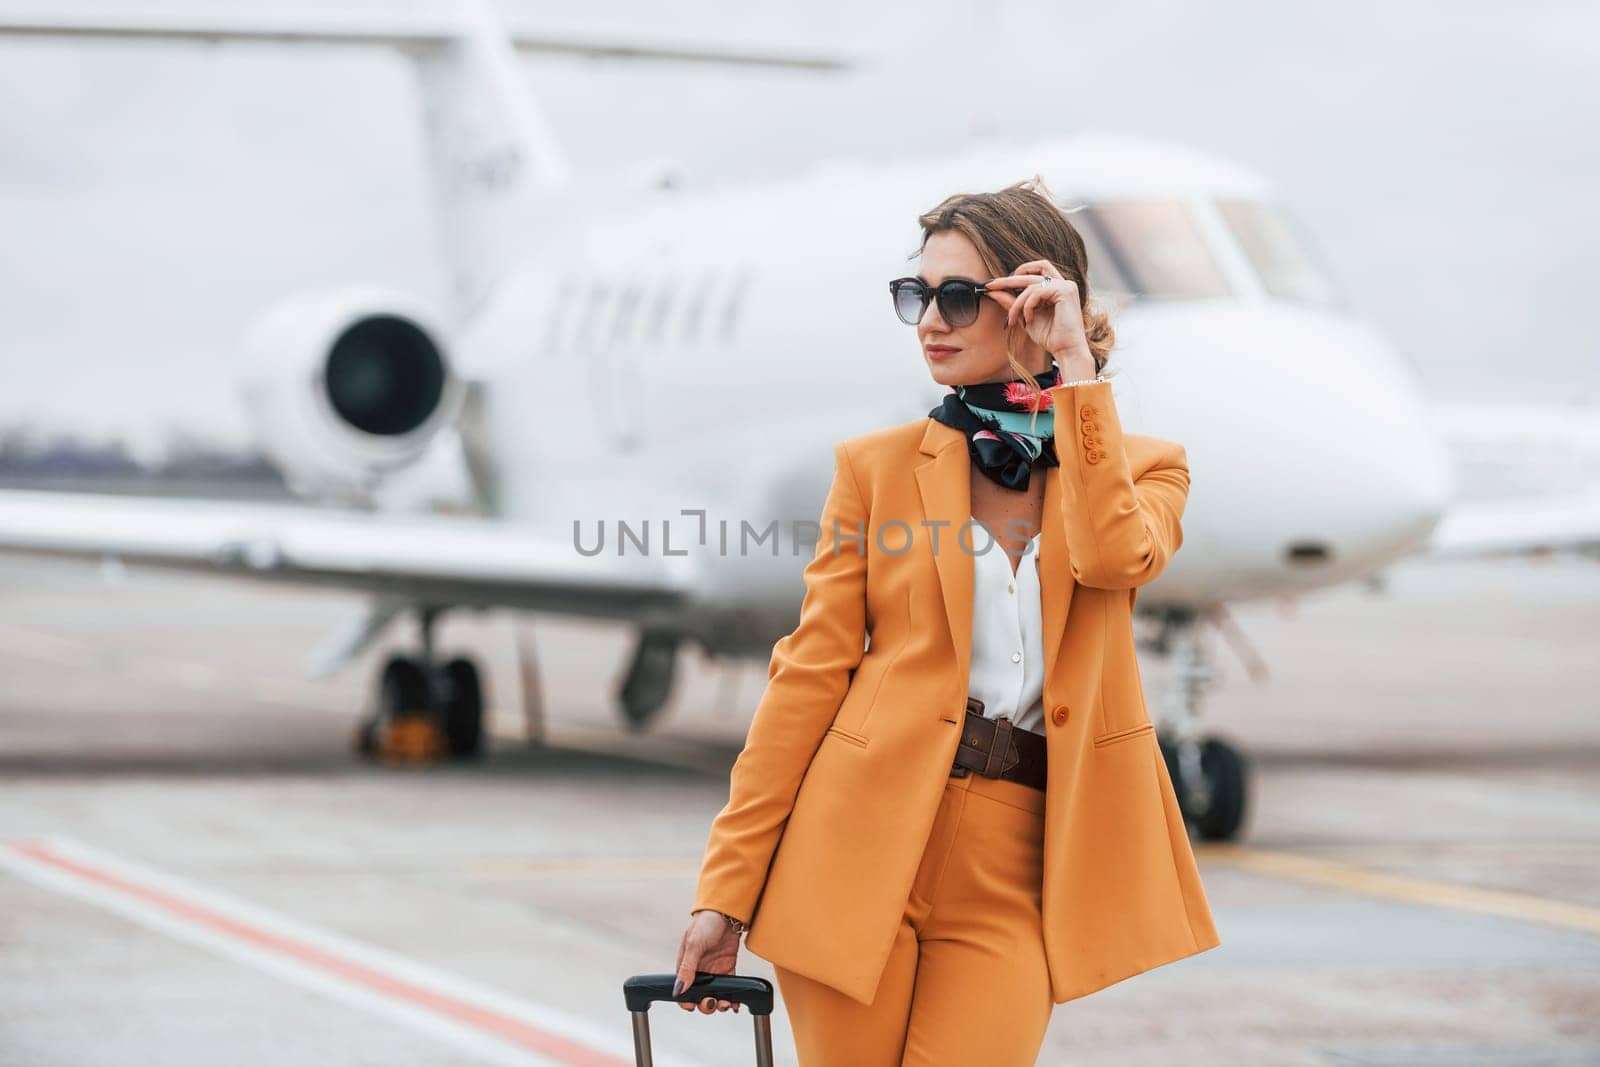 Conception of tourism. Passenger woman that is in yellow clothes and sunglasses by Standret